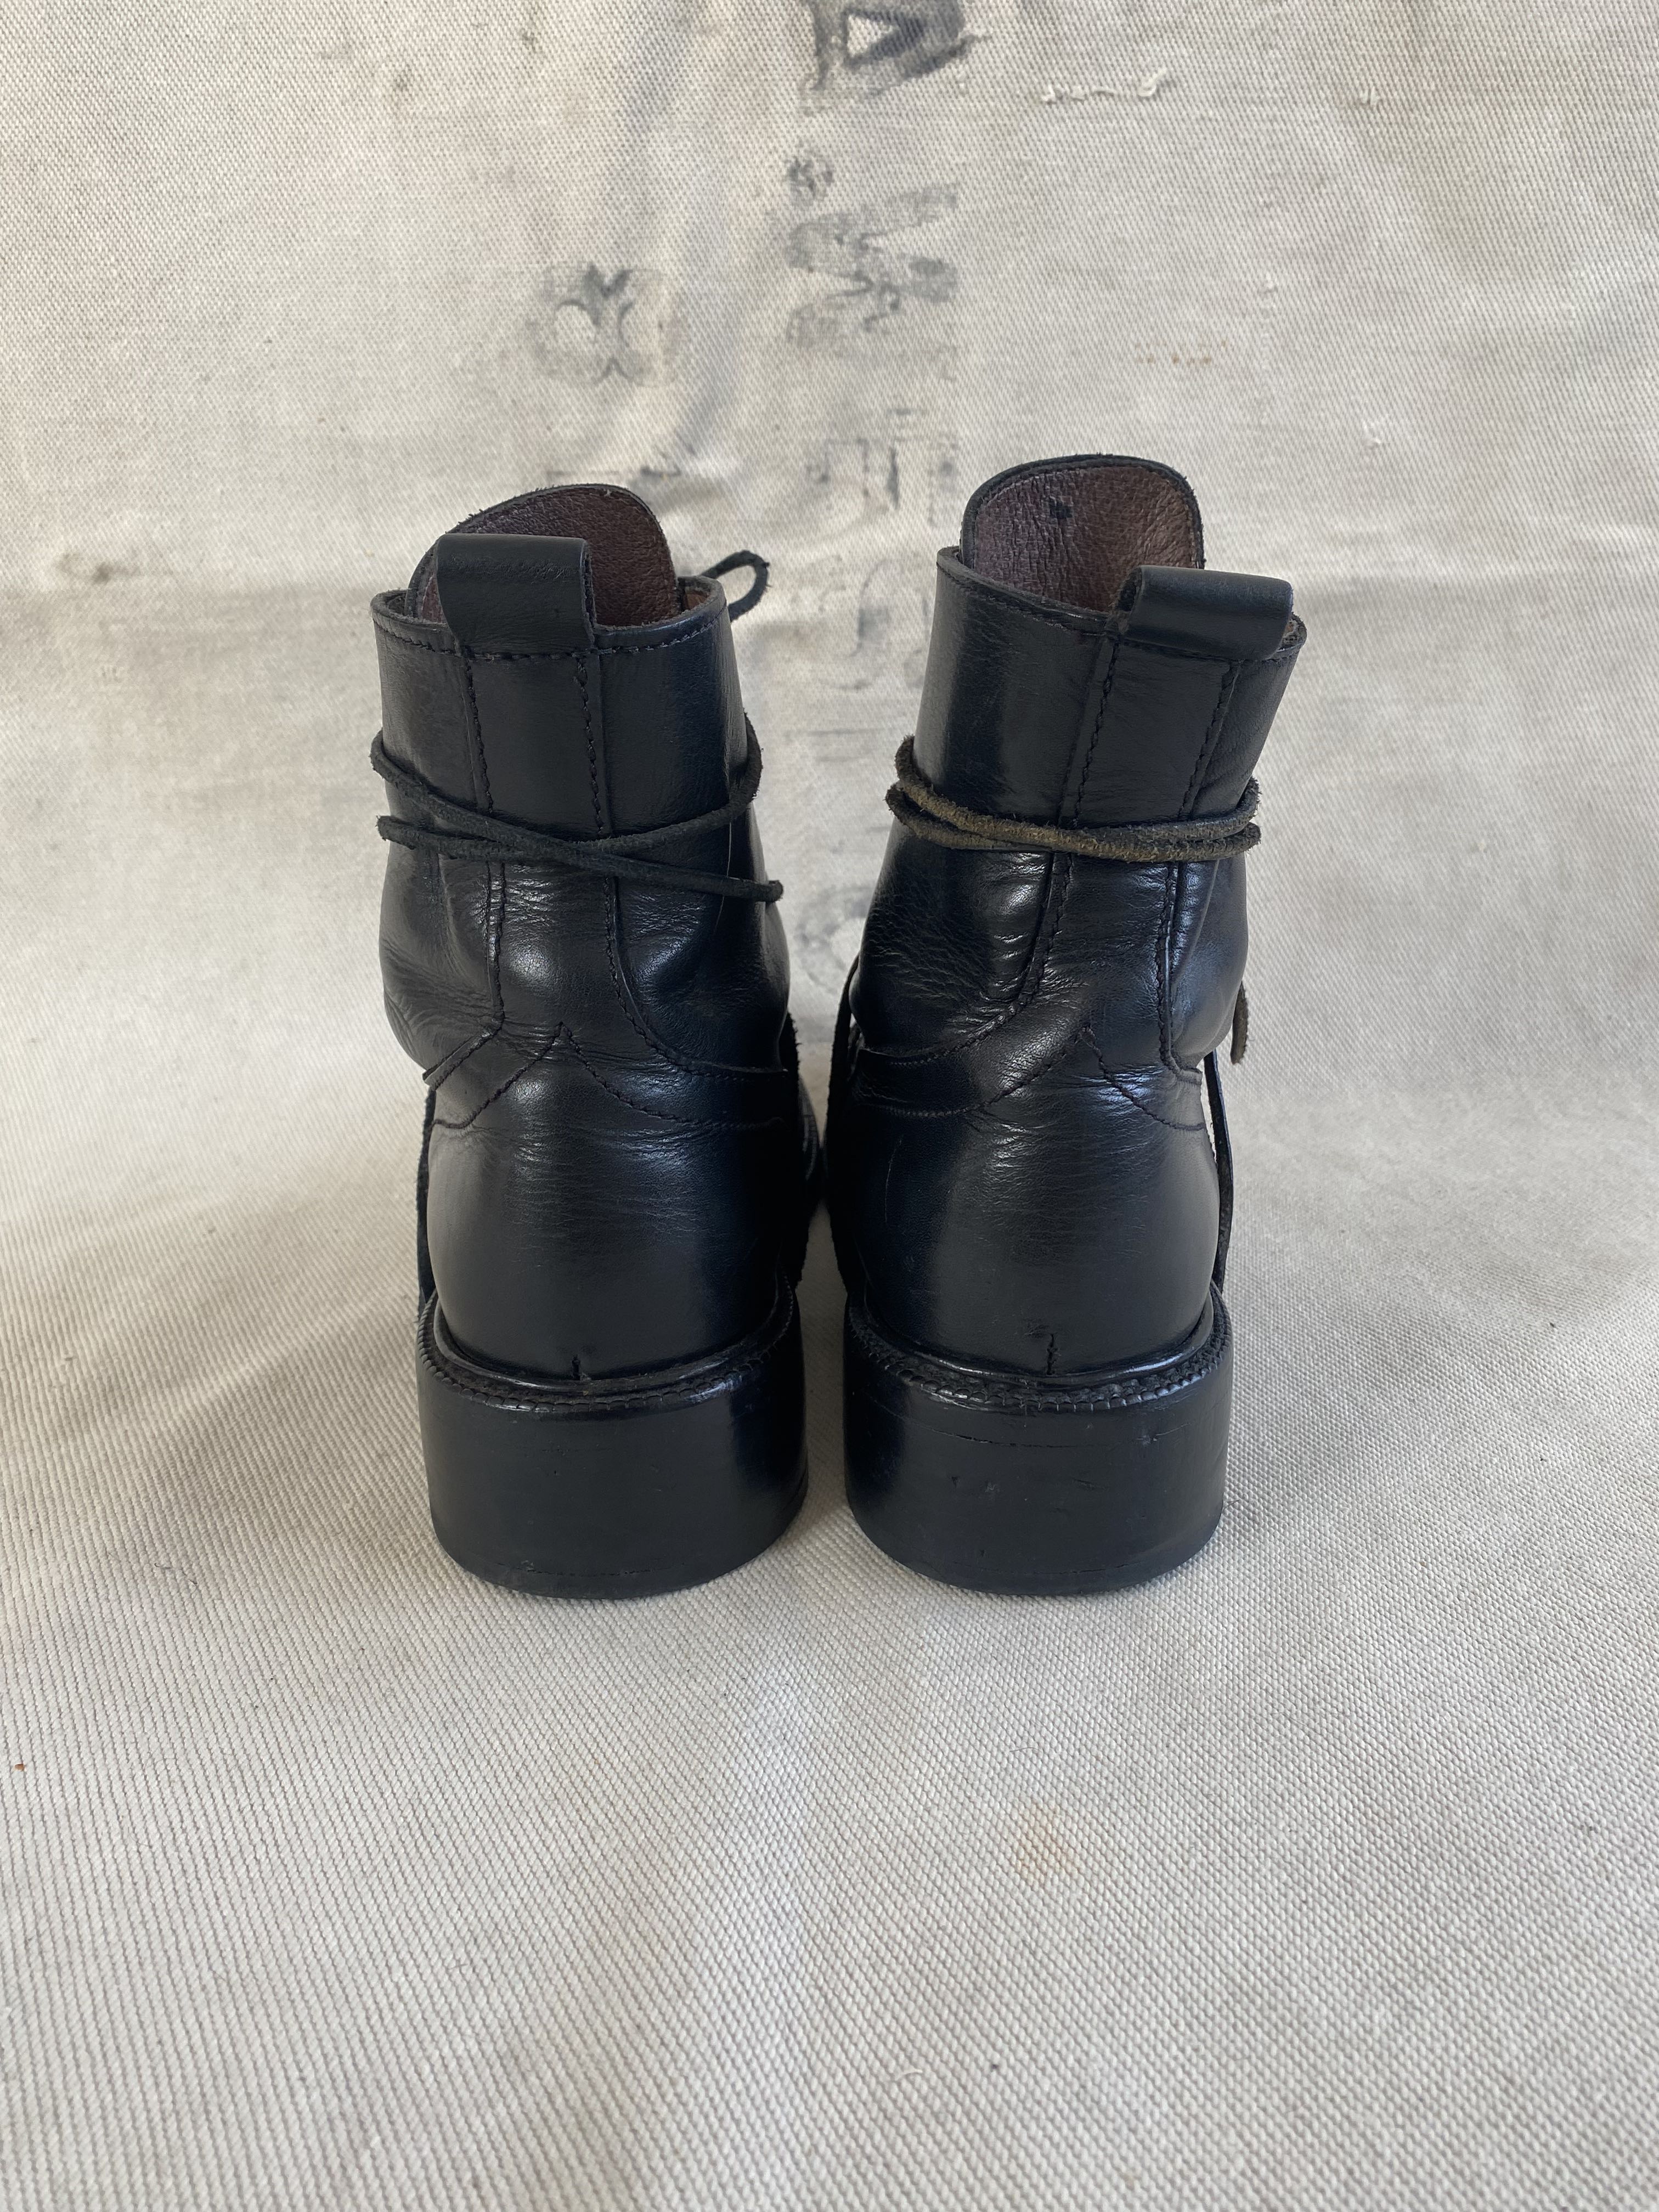 Dirk Bikkembergs 90s Archive Boots - 6